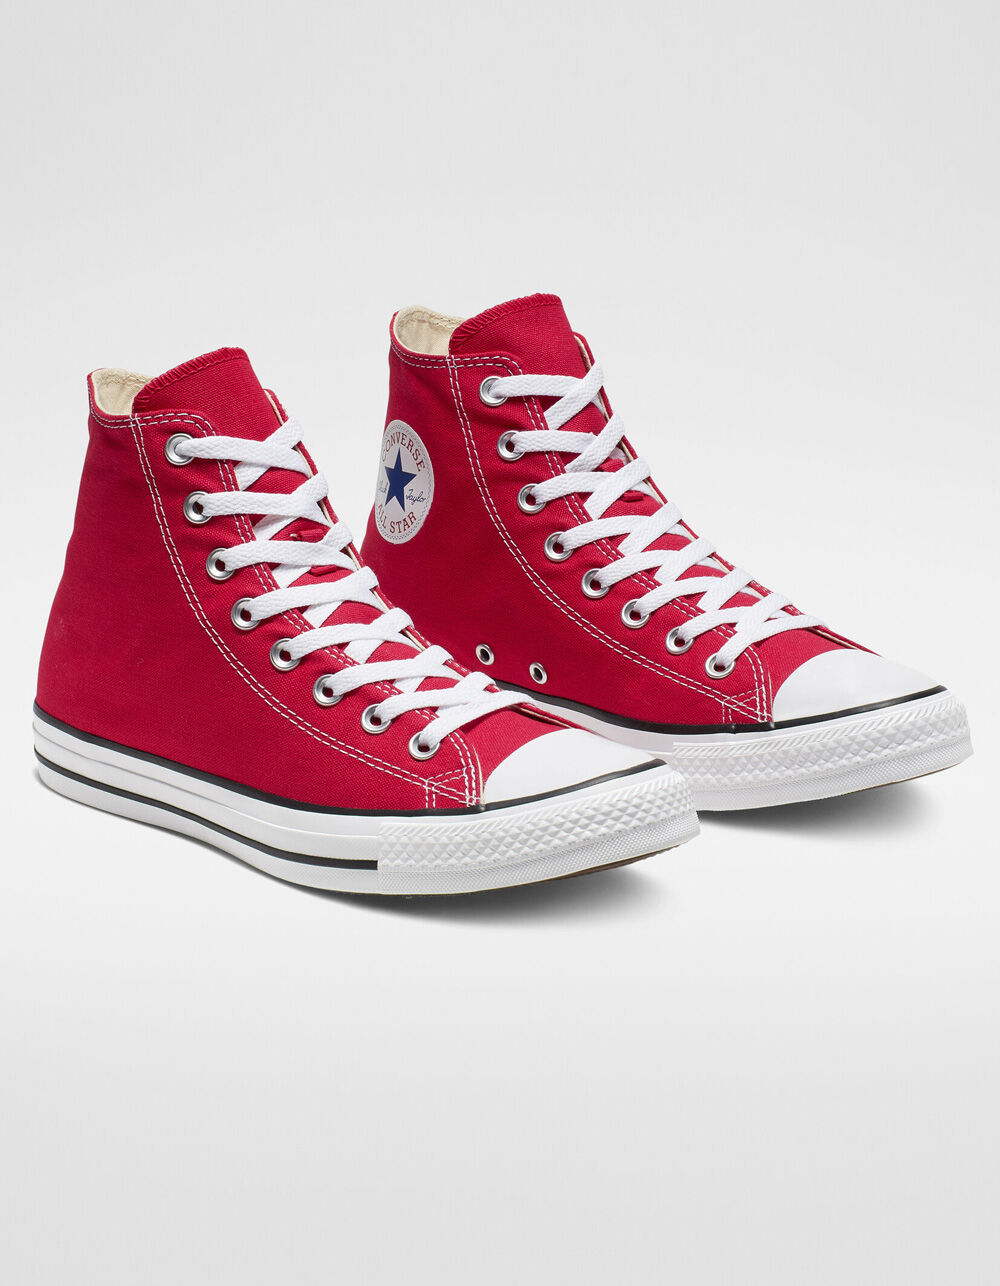 Stille Sinis Okklusion converse chuck taylor all star high top ...